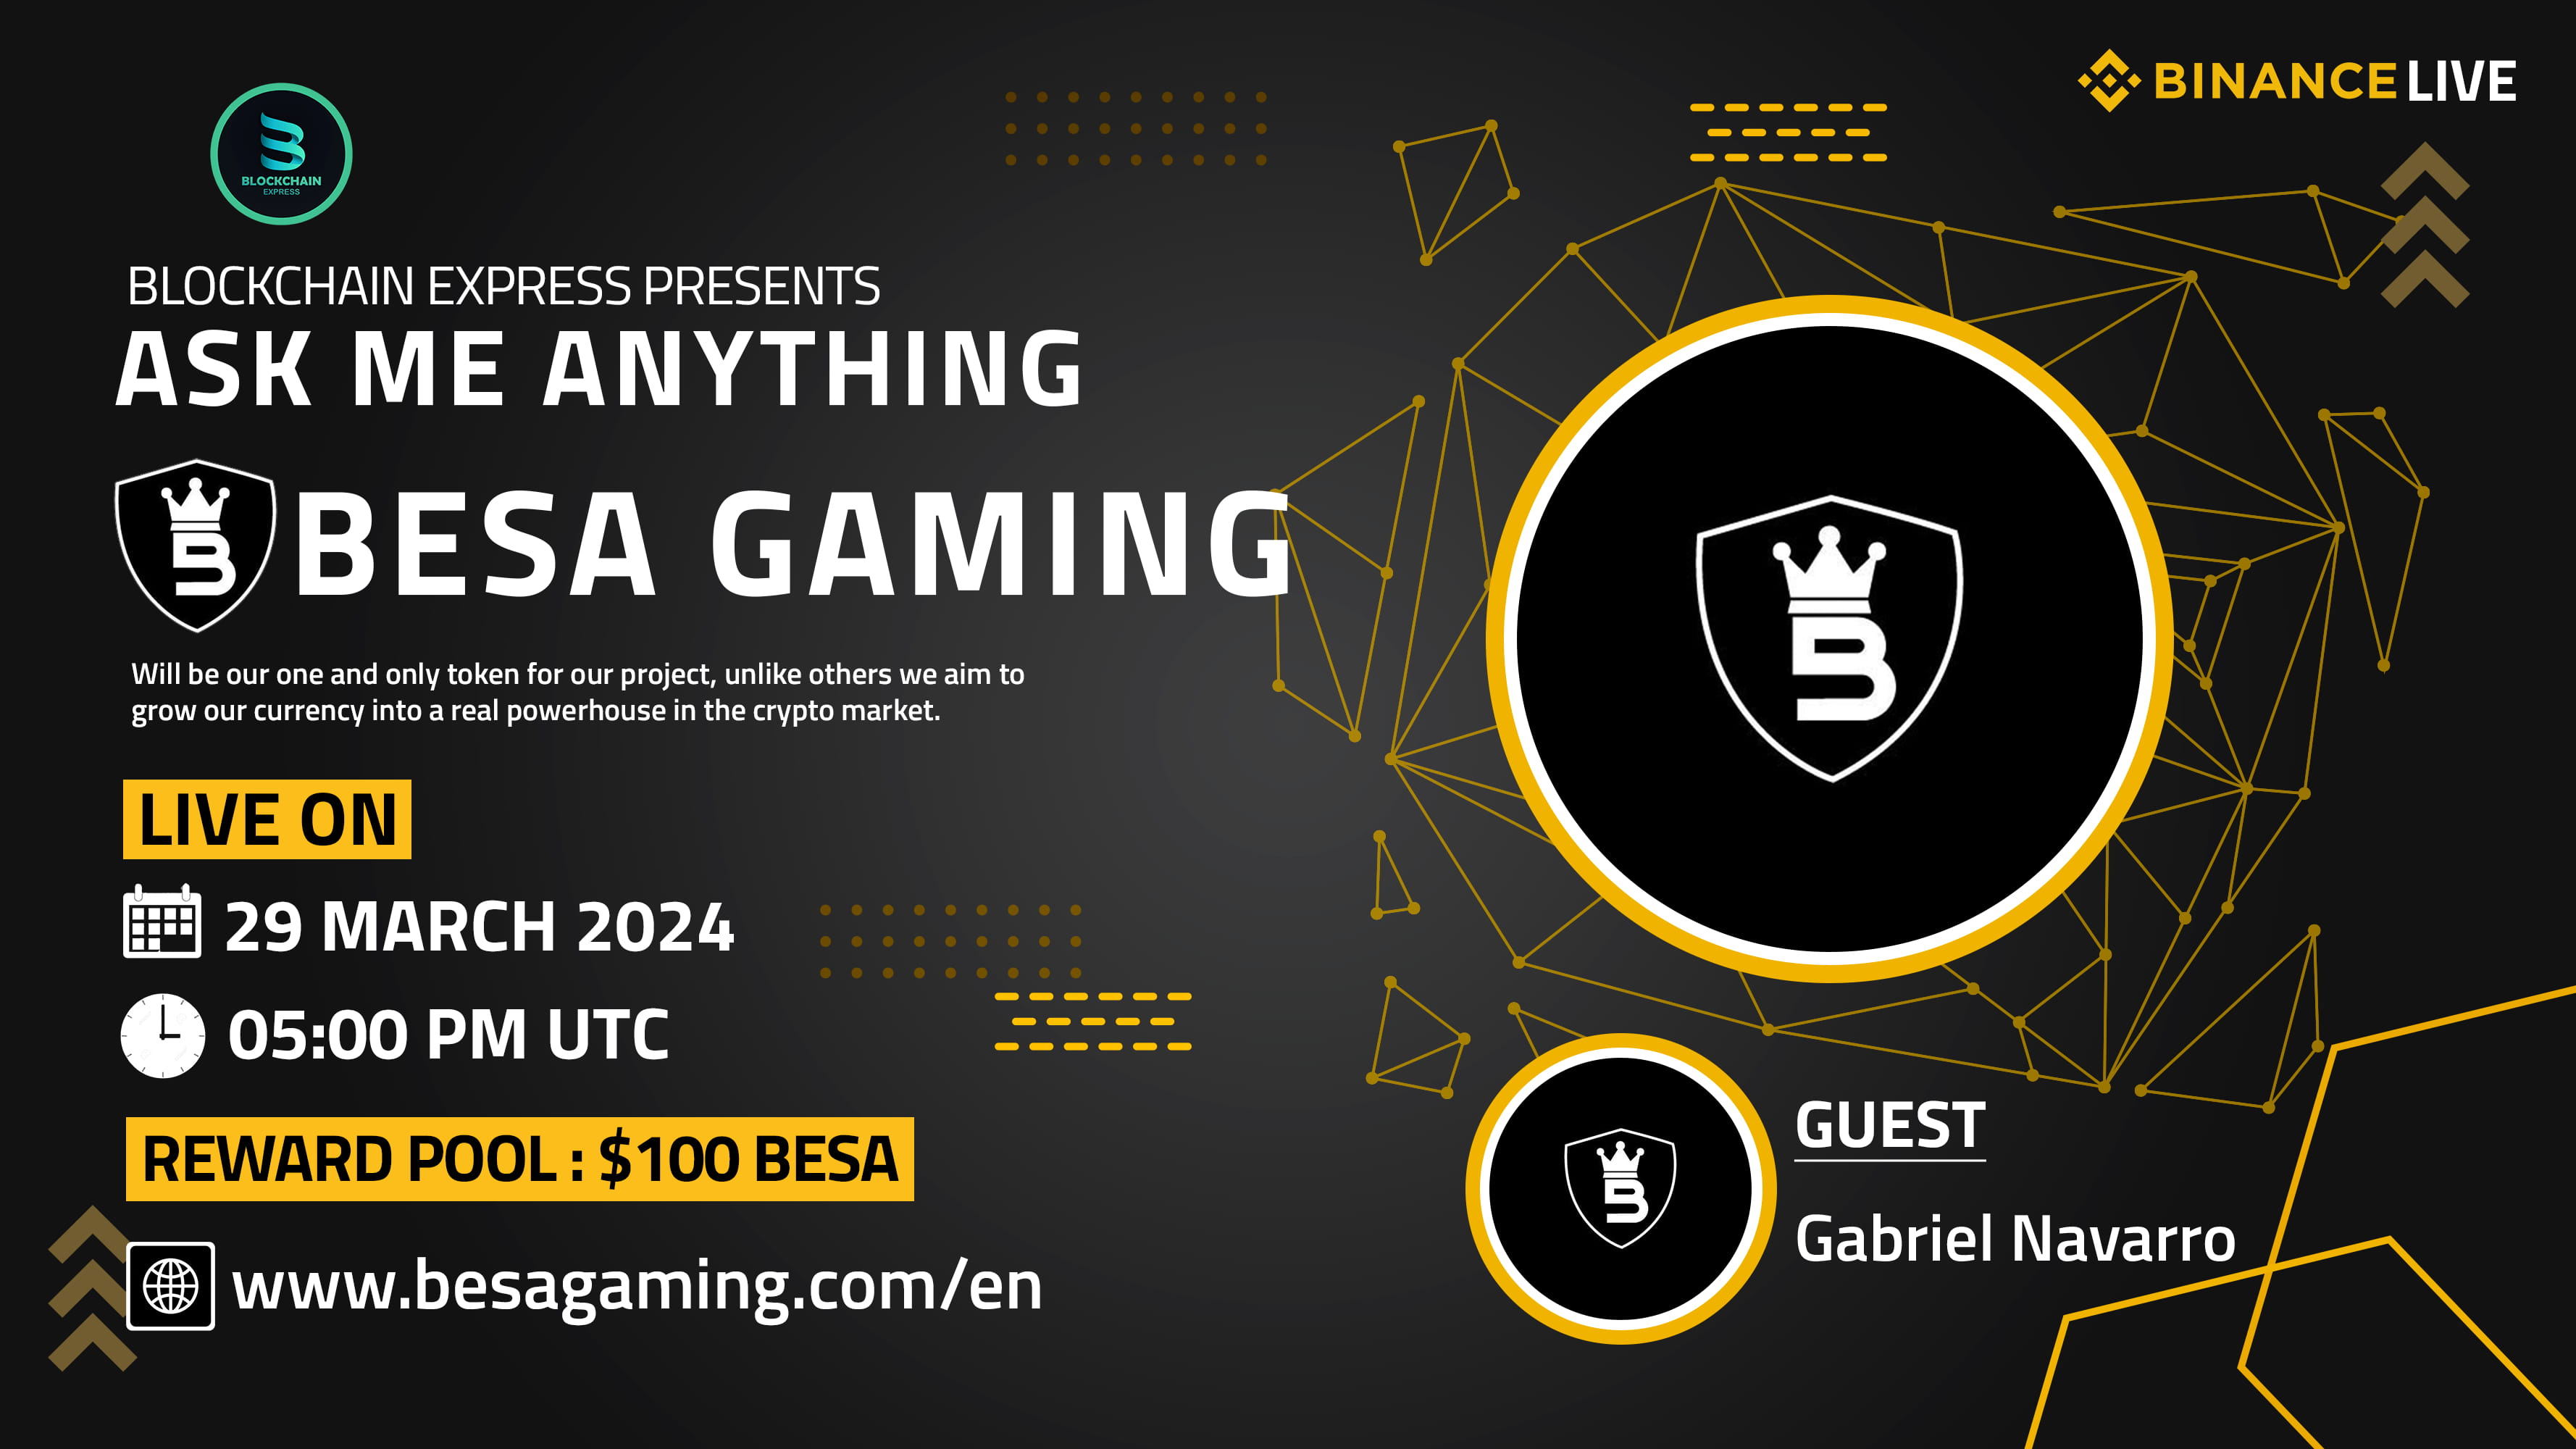 ₿lockchain Express will be hosting an AMA session with" Besa Gaming "